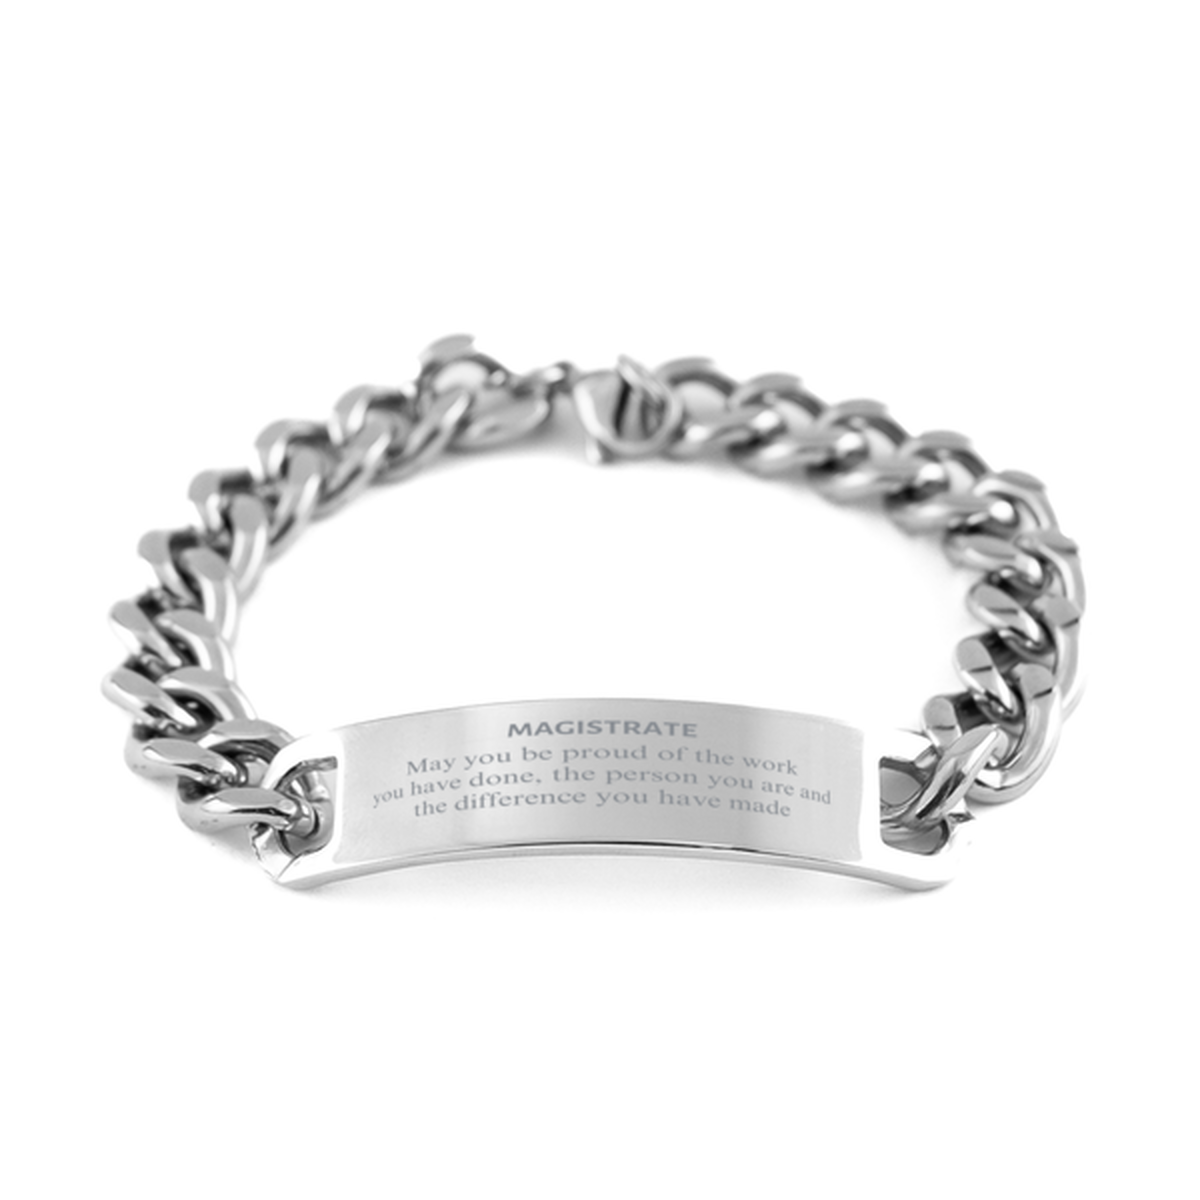 Magistrate May you be proud of the work you have done, Retirement Magistrate Cuban Chain Stainless Steel Bracelet for Colleague Appreciation Gifts Amazing for Magistrate